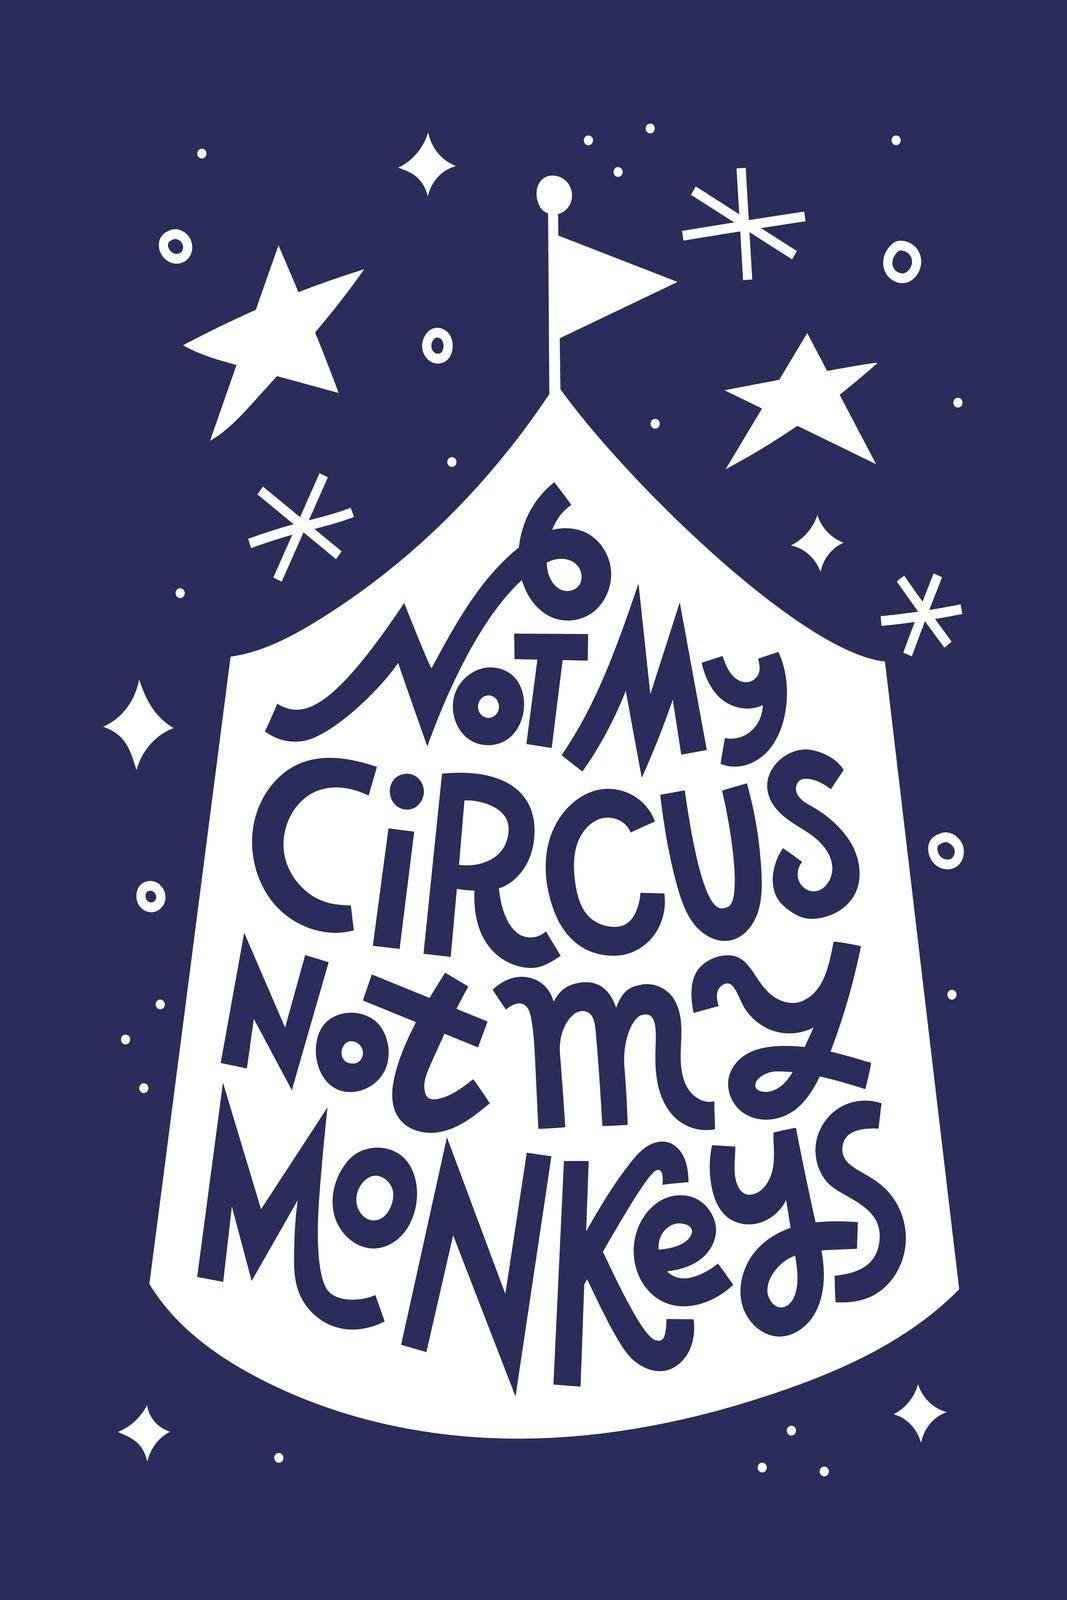 Not my circus, not my monkeys. Funny Polish saying. Hand-drawn lettering phrase for T-shirts, art prints, merchandise. White on dark background. Ready for screen print.